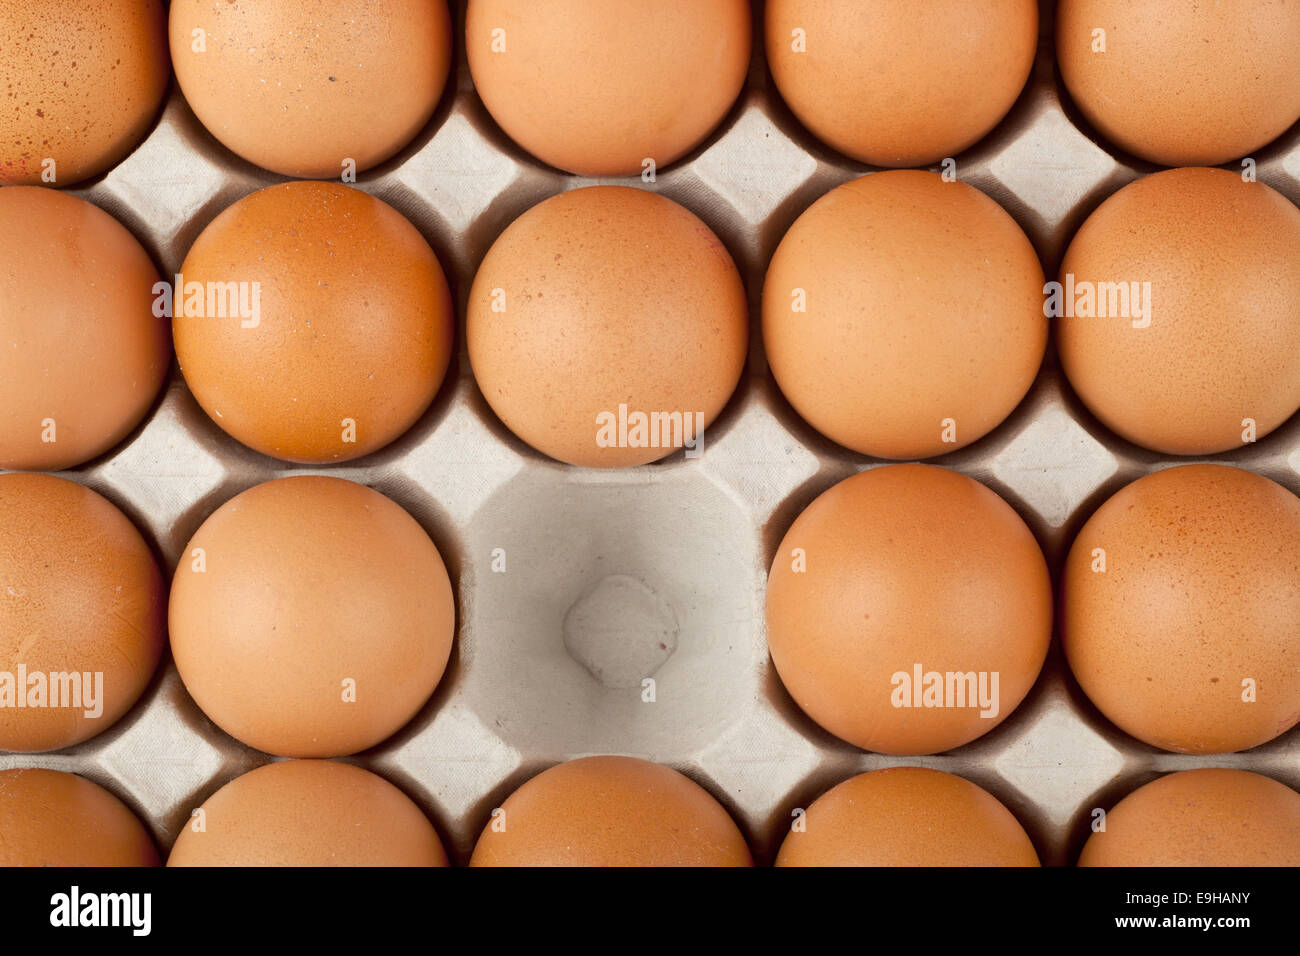 One chicken egg missing from a tray of eggs Stock Photo